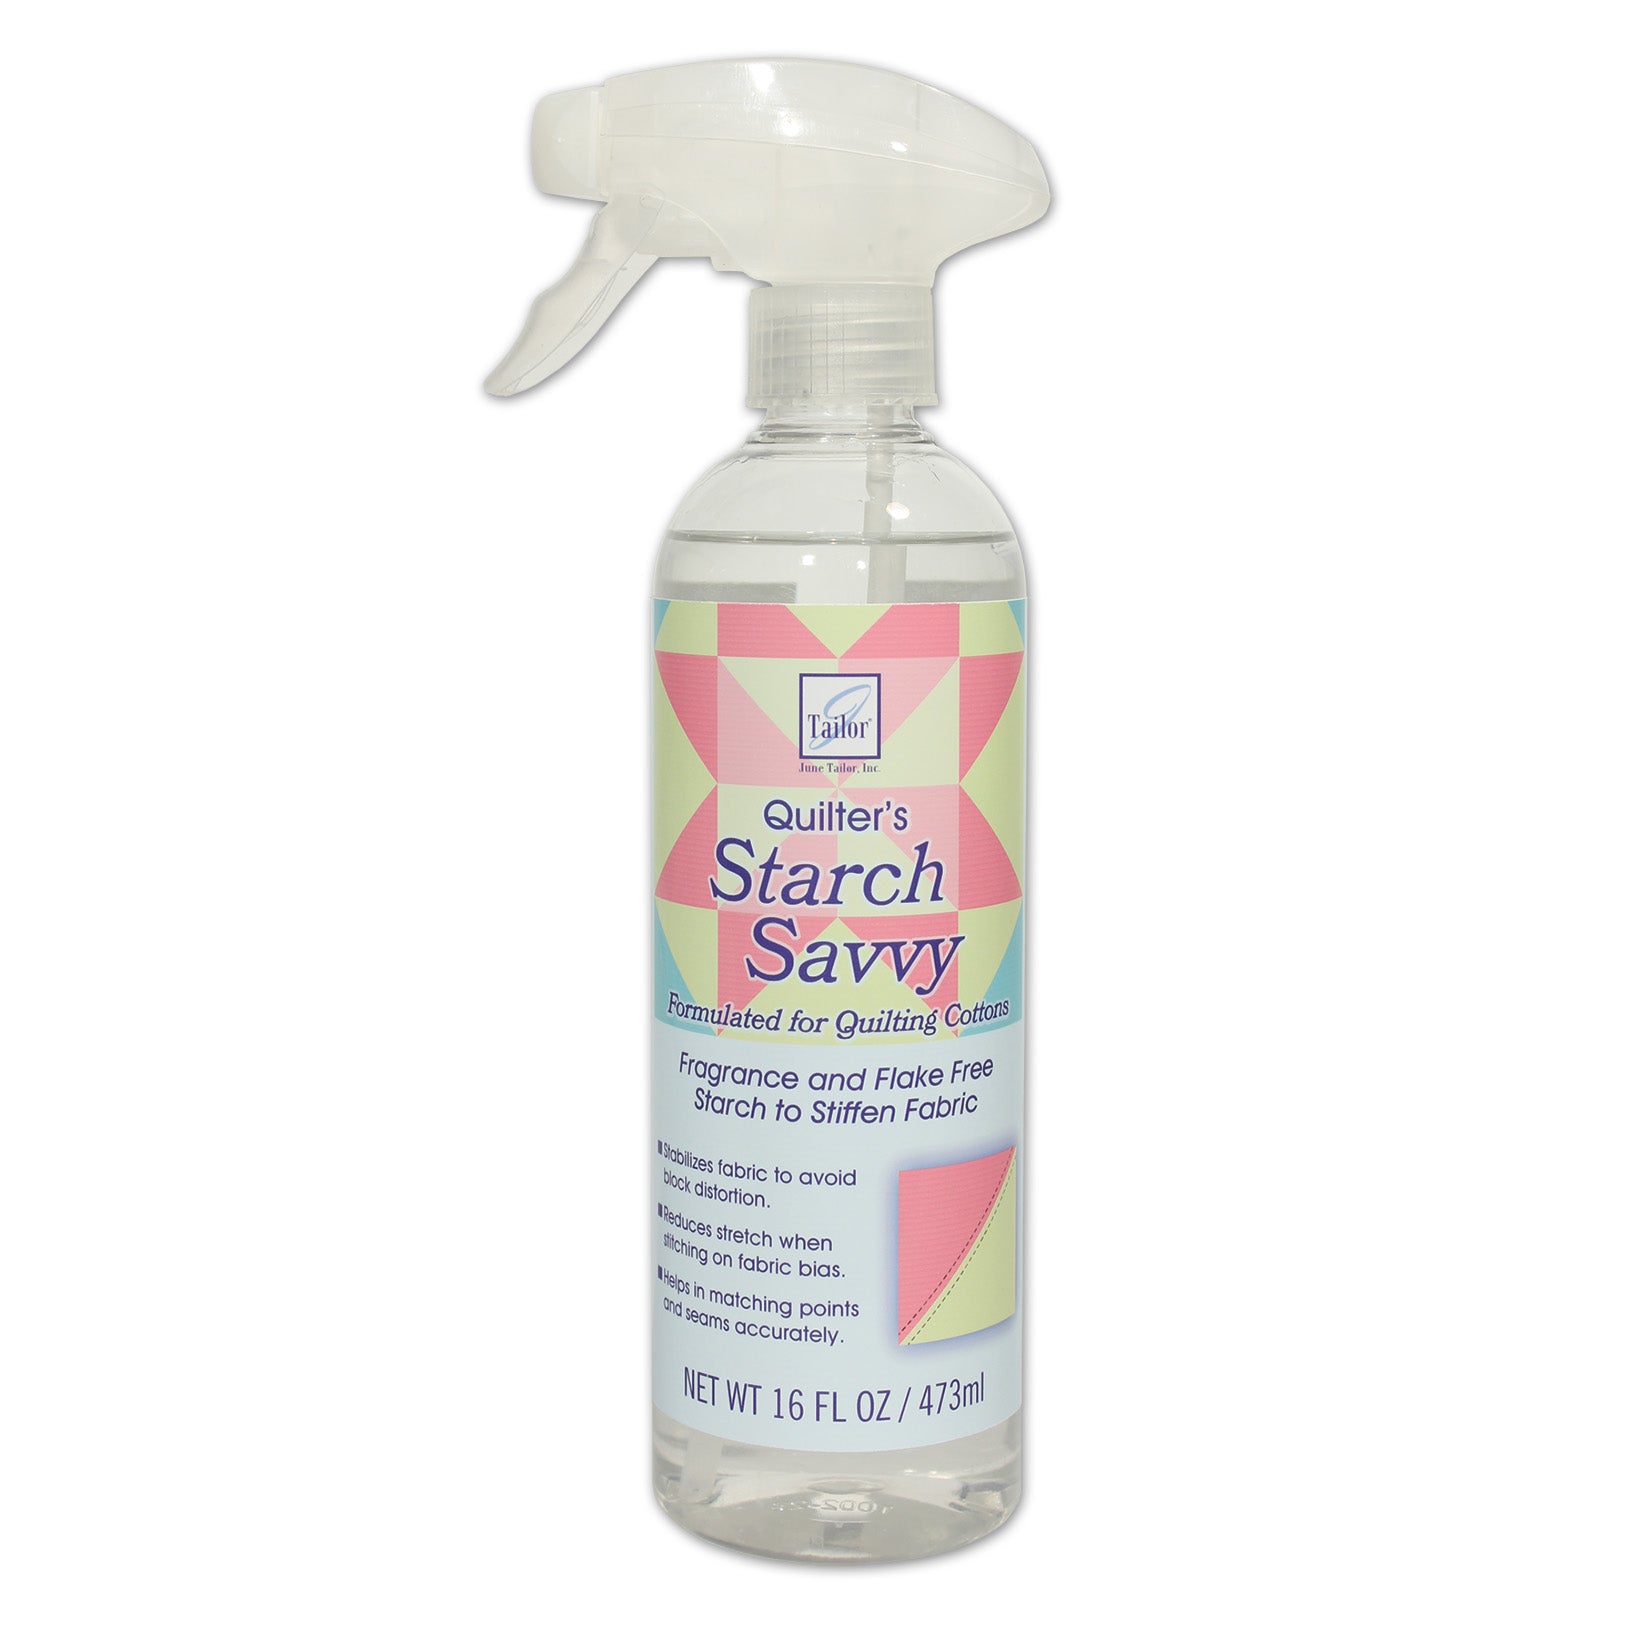 2023 June Tailor Collection-Starch Savvy, 16 ounce trigger spray bottle-Pressing Notions